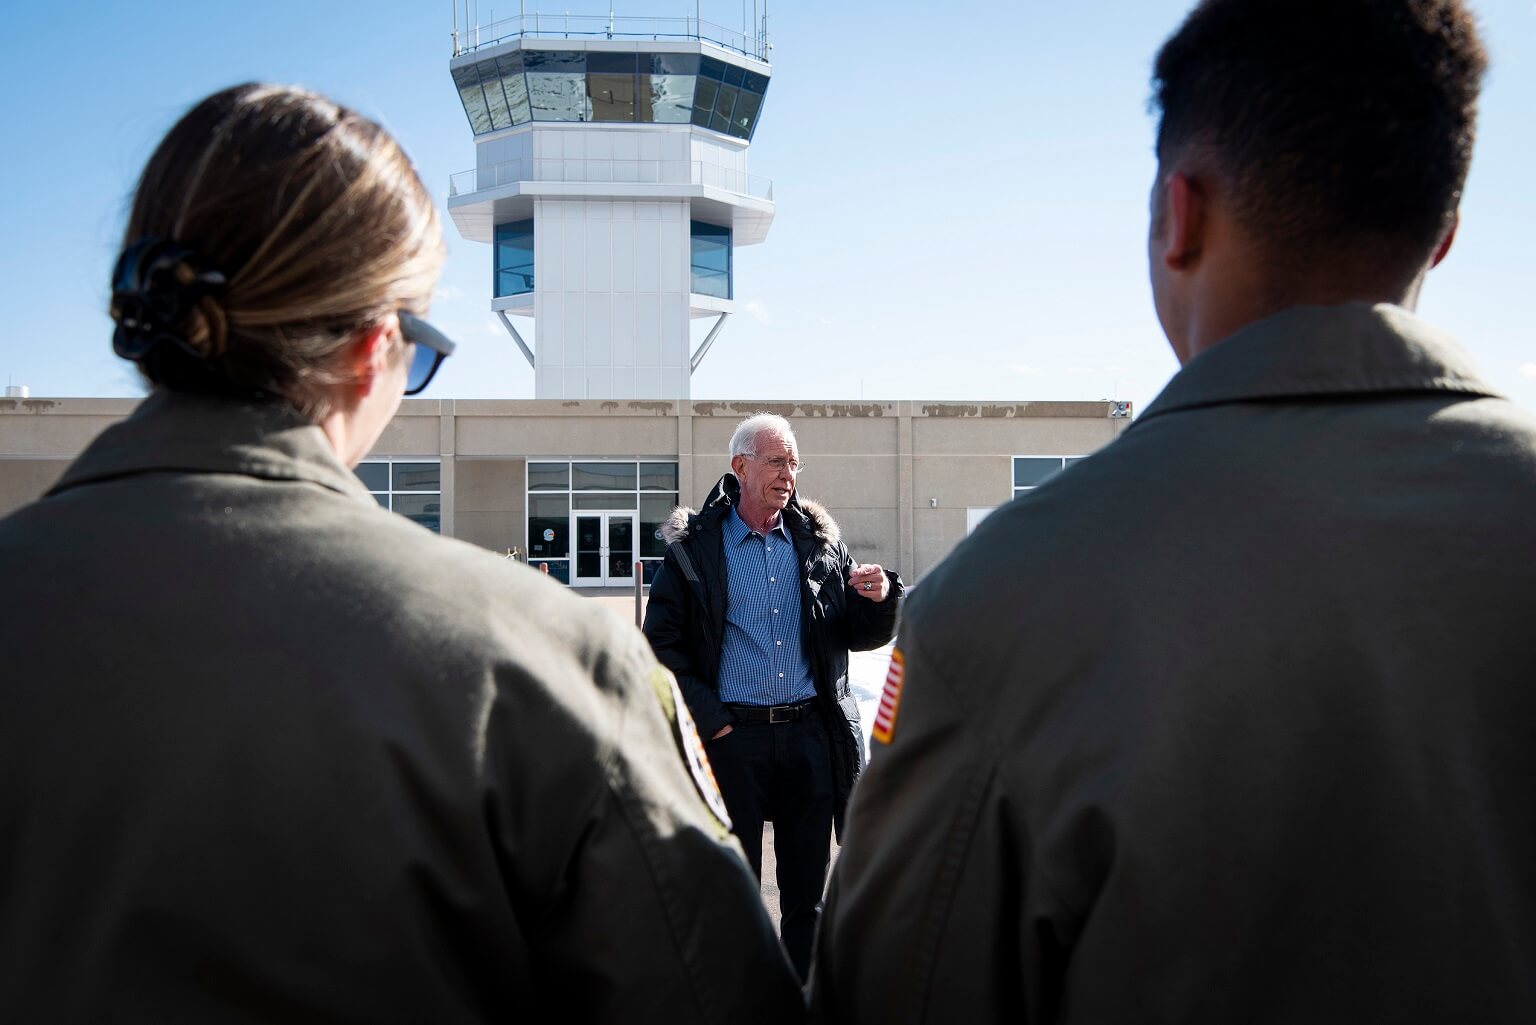 Sullenberger speaks to members of the 94th FTS in front of the Davis Airfield’s control tower.